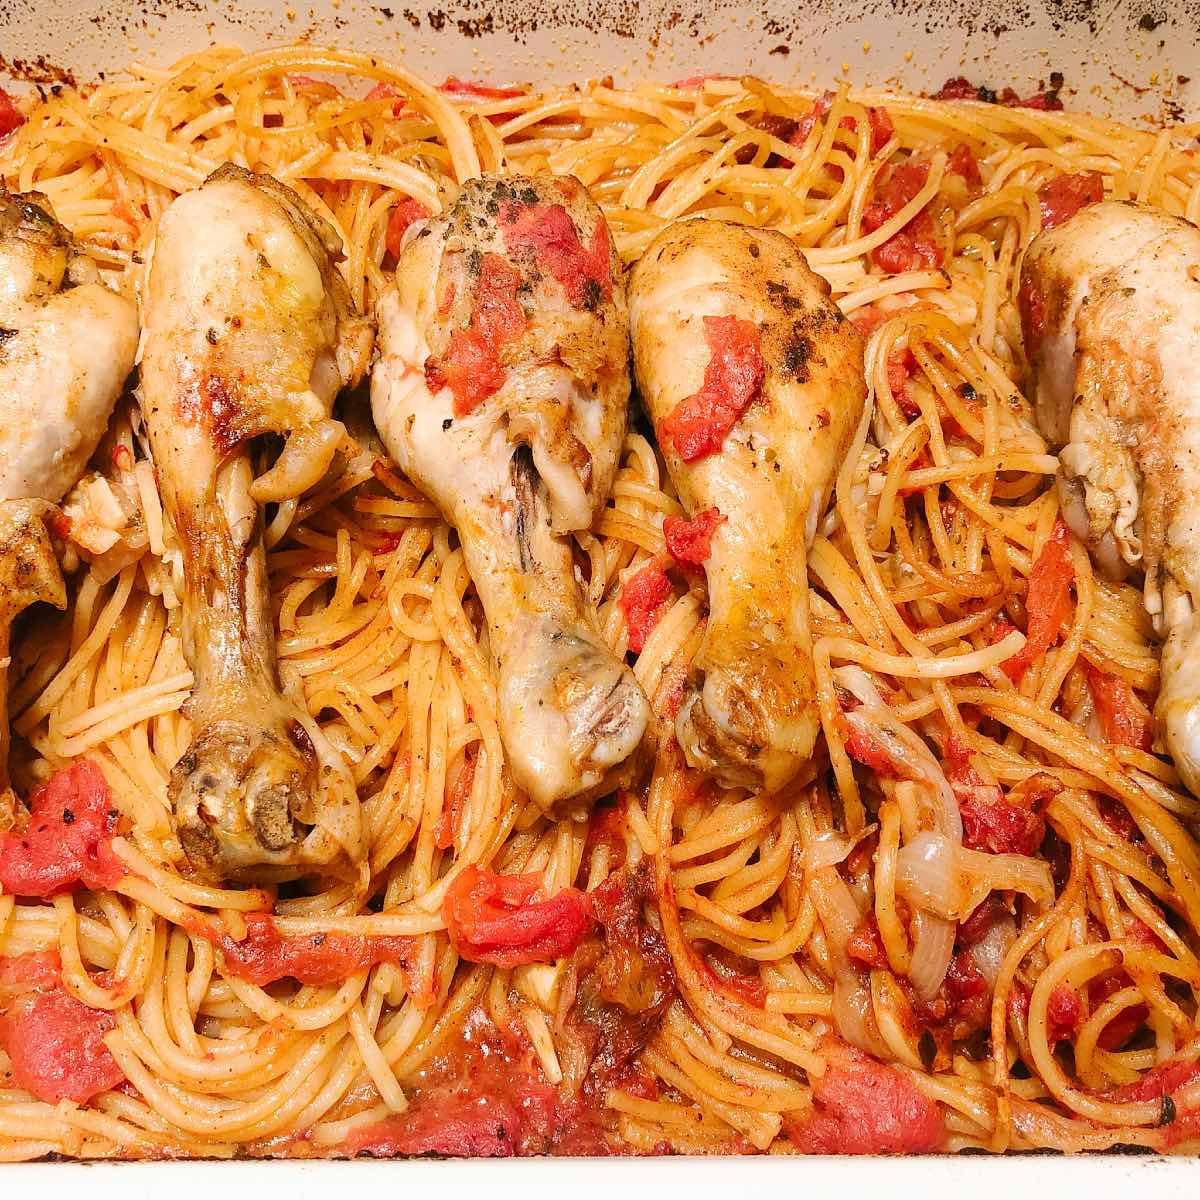 baked chicken drumsticks in a baking dish with spaghetti and tomato sauce.